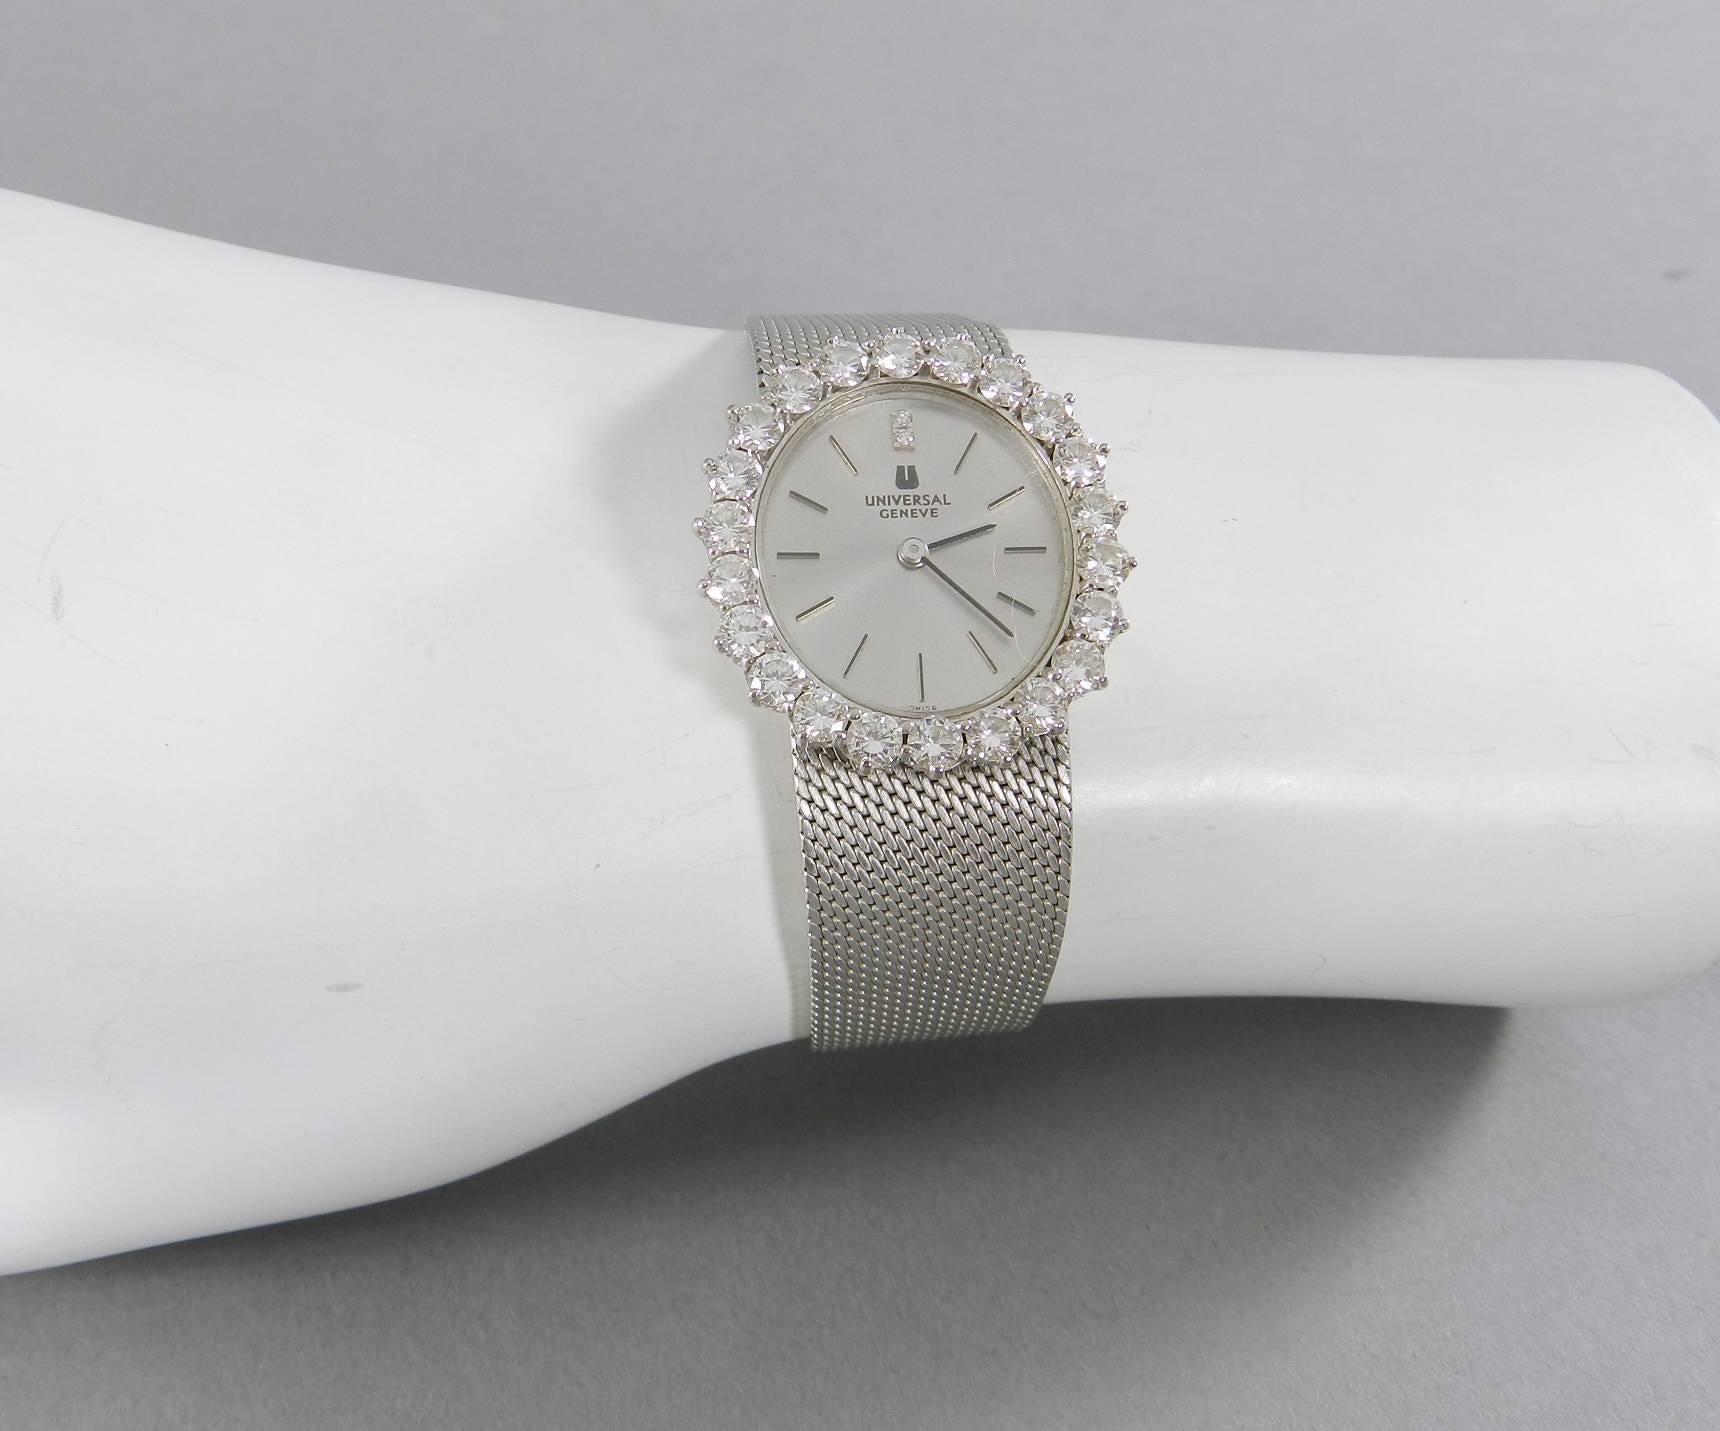 1960s Universal Geneve 18k White Gold Diamond Ladies Wrist Watch.  Excellent condition from the late 1960's. Manual wind up watch keeps time well. Hallmarked 750 and is 18K white gold.  22 Diamonds approx. 15 points each, totalling approx. 3 carats